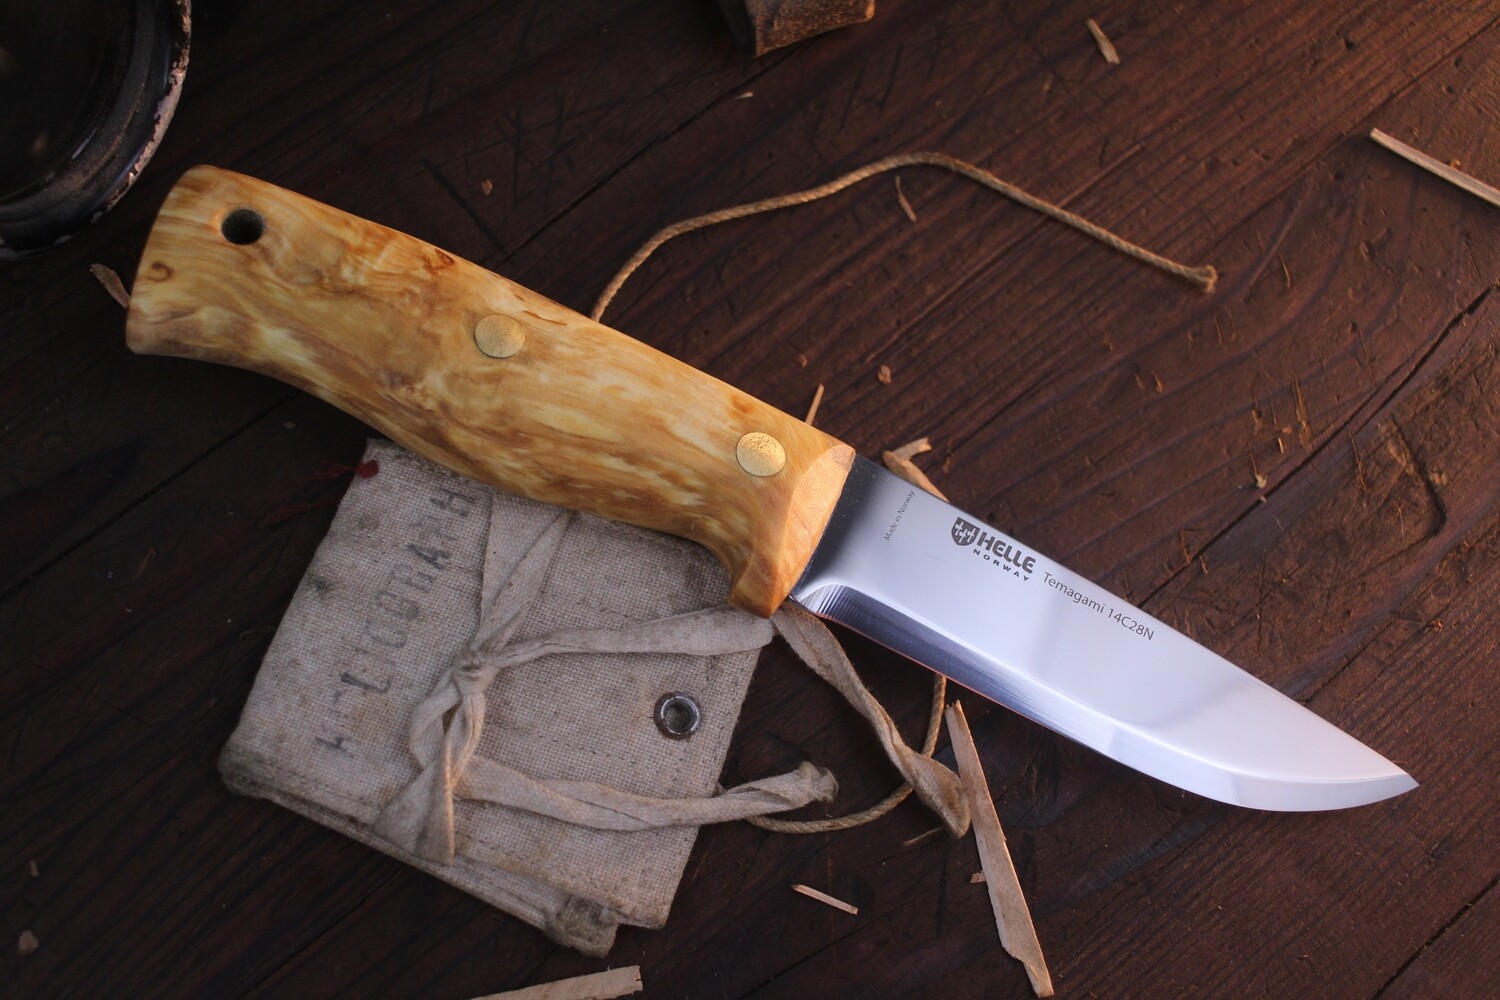 Helle Temagami 10 Year Anniversary 4.25" Fixed Blade / Curly Birch / 14C28N (Previously Owned)